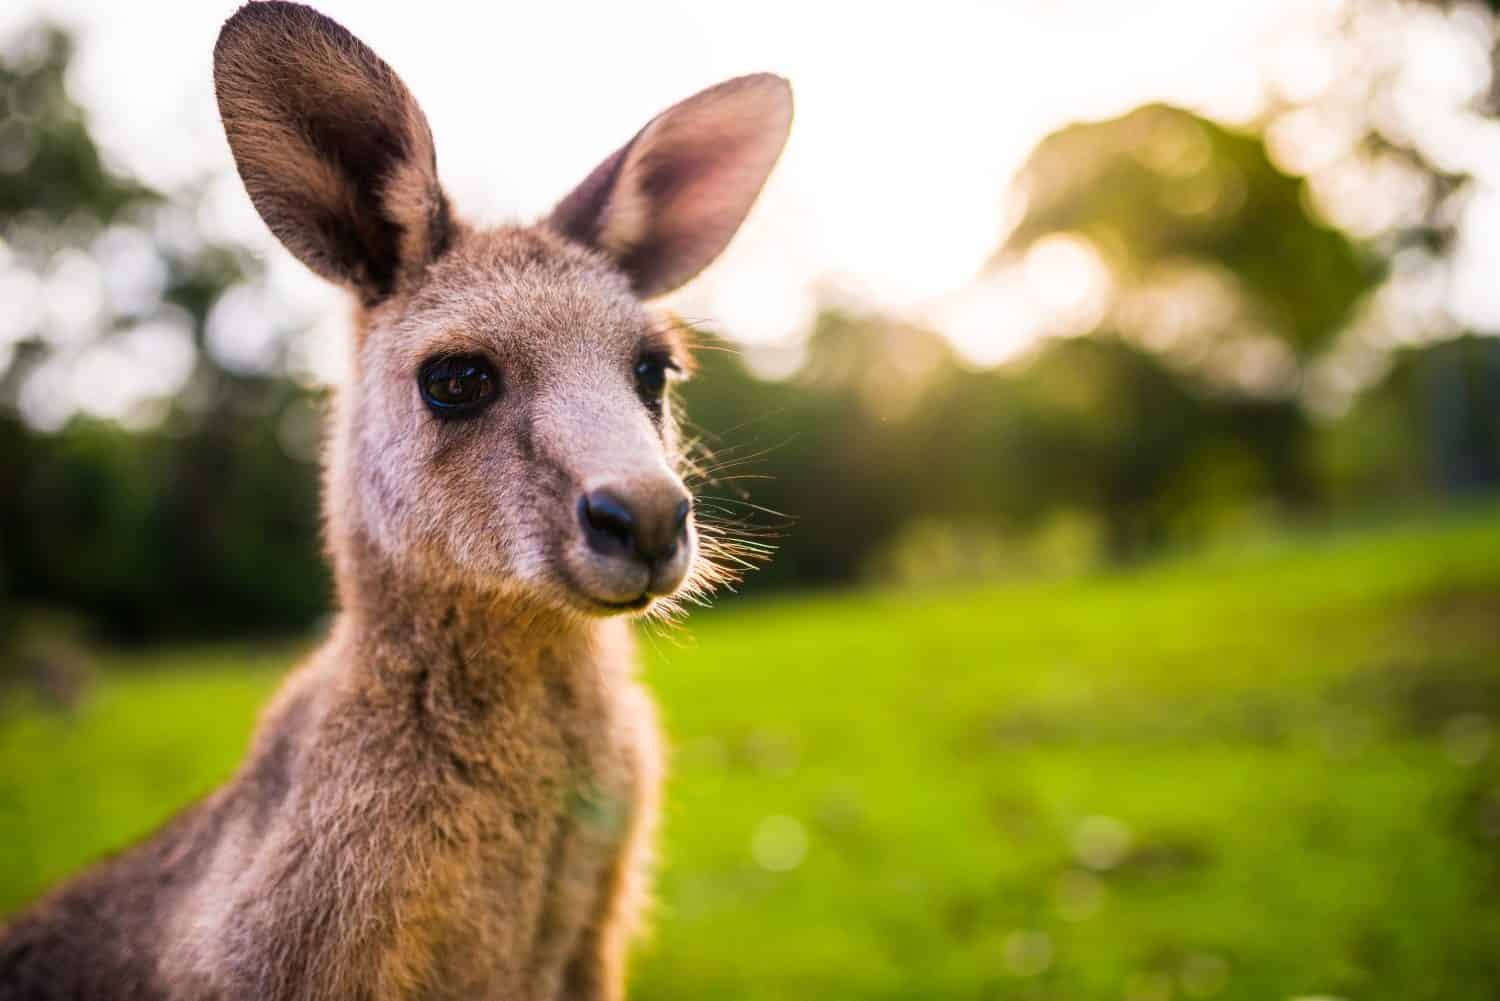 Young Kangaroo on east coast of Australia. Close up of head and face. Photographed in the wild